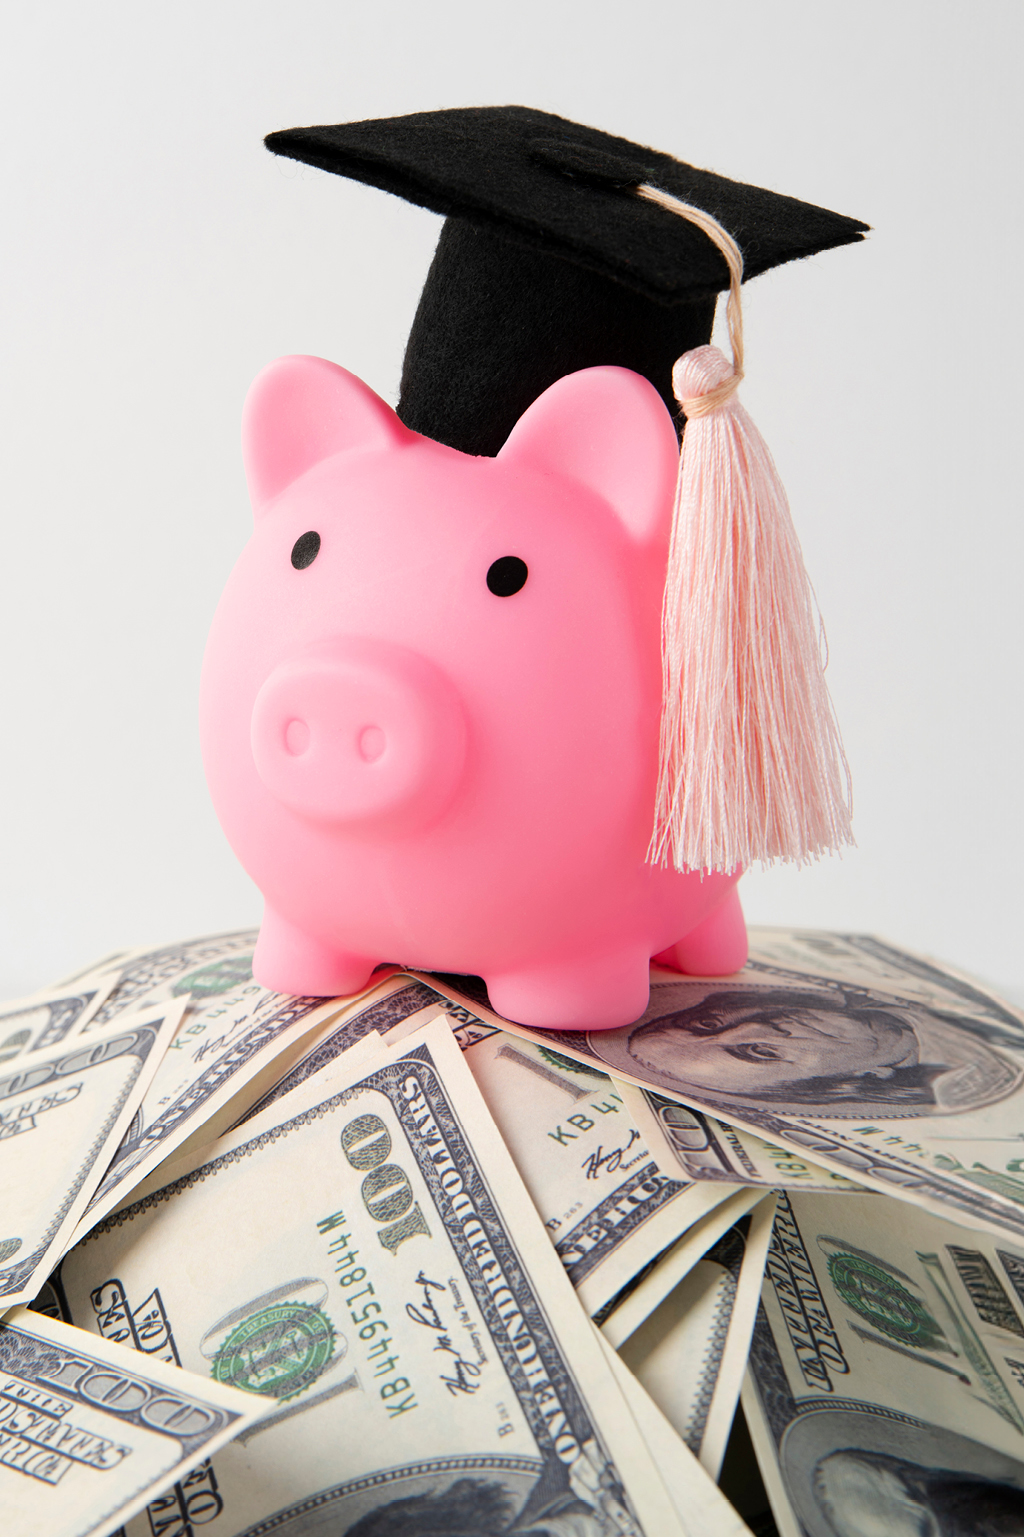 Pink toy pig wearing graduation cap on a stack of money